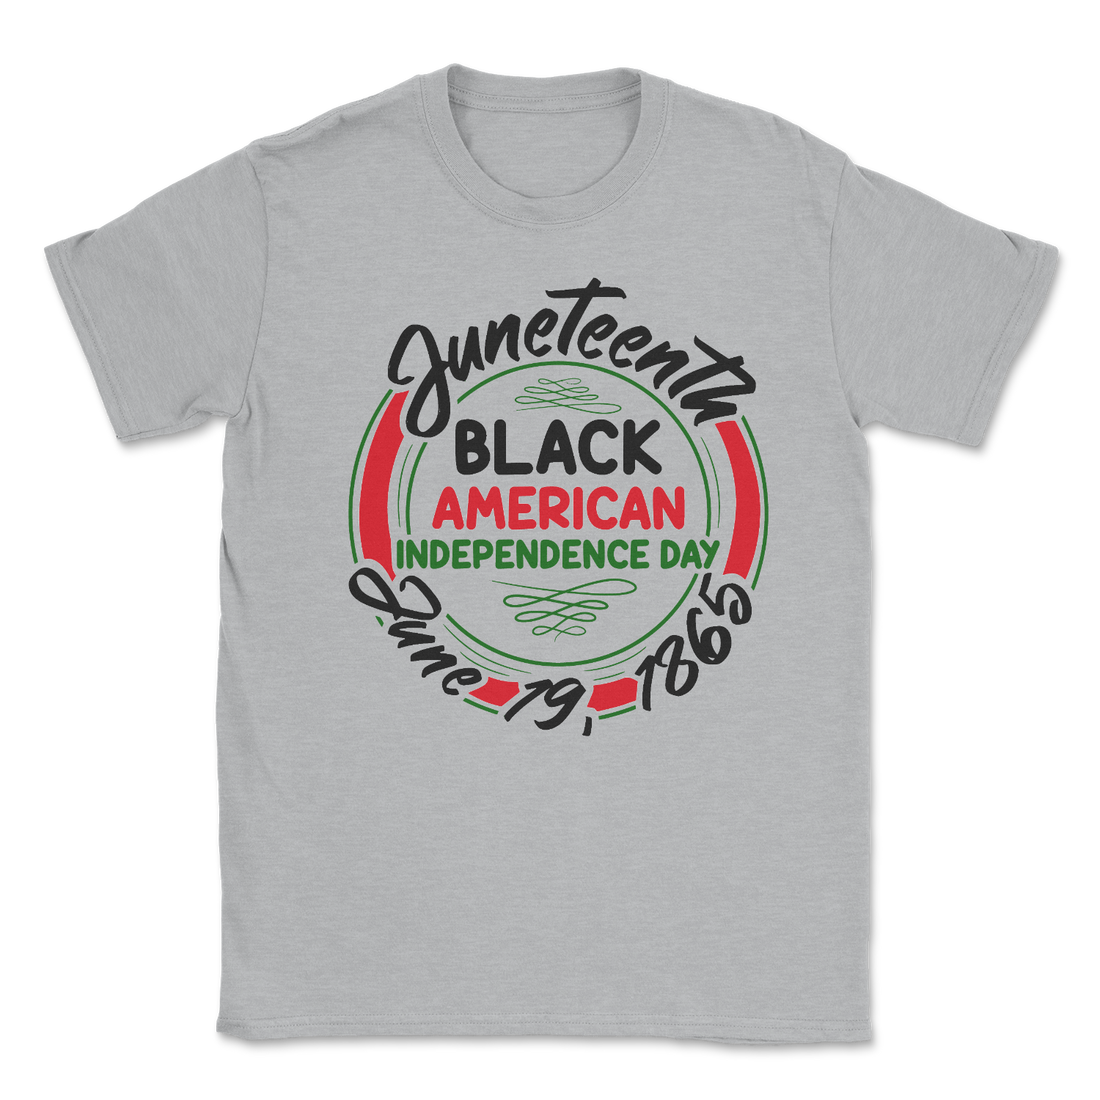 Juneteenth-black-american-independence-day-tee-shirt-grey-fab five print shop